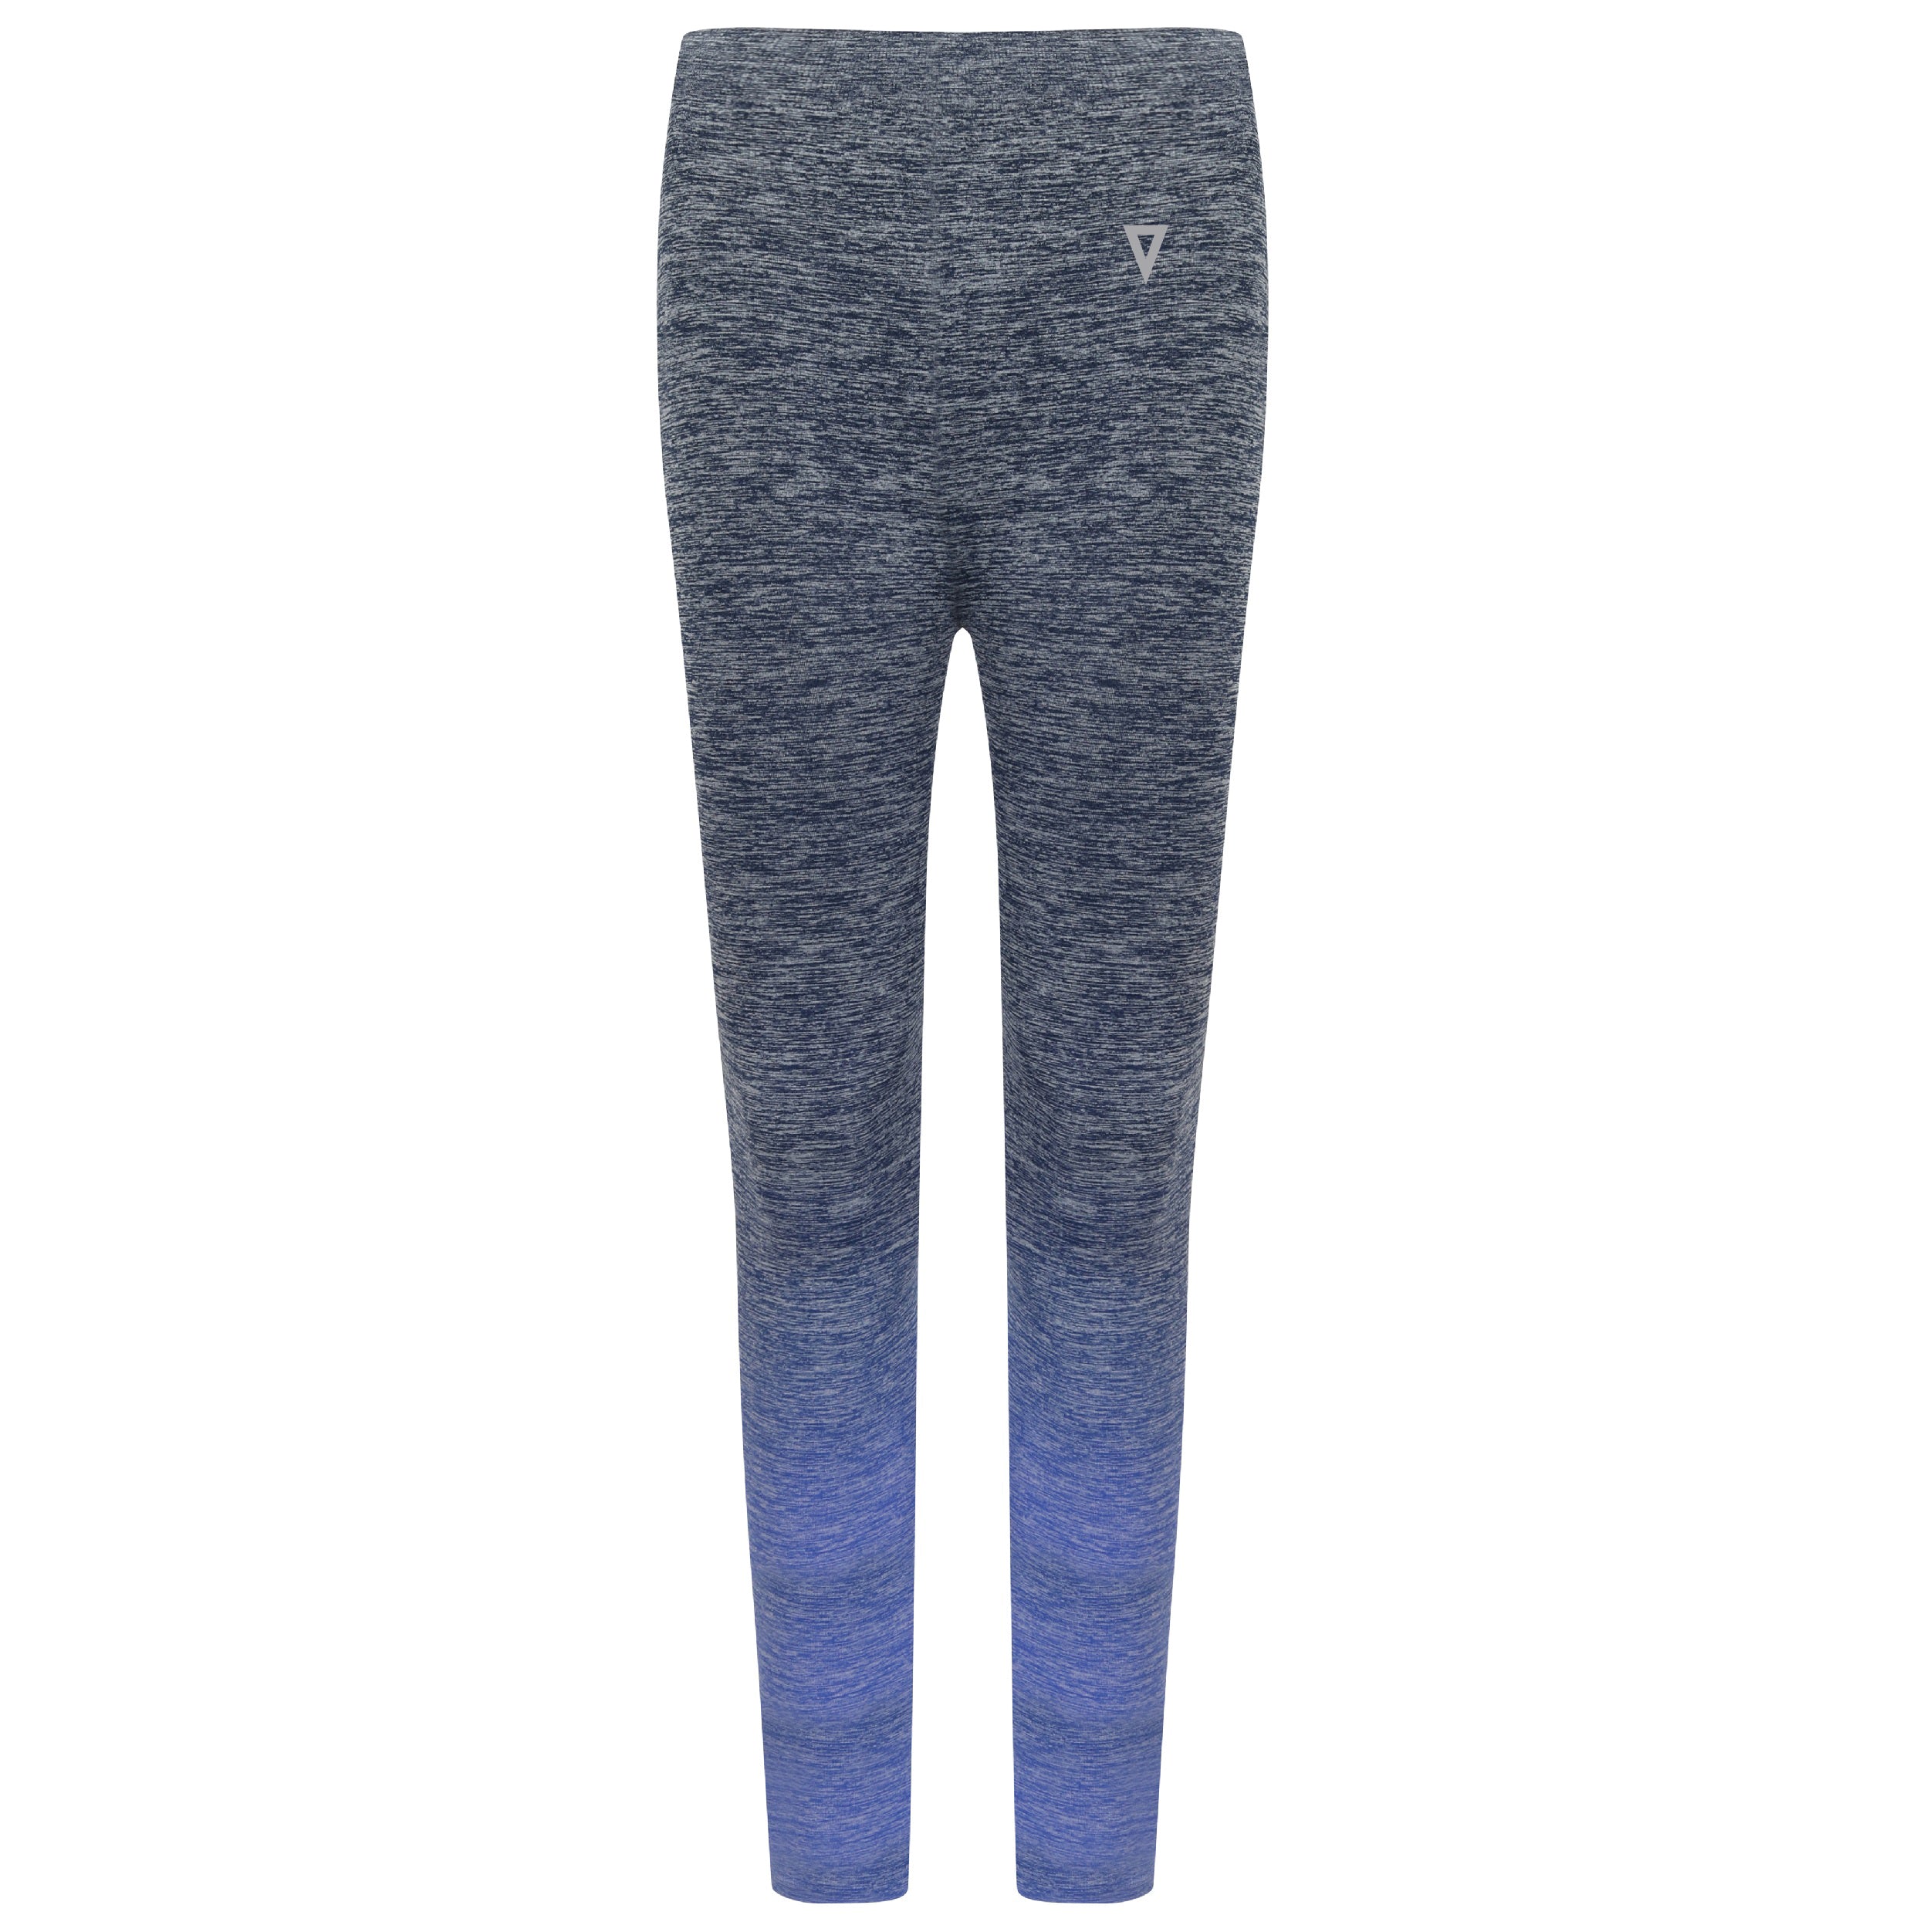 Validate Seamless Fade Out Legging Blue Marl